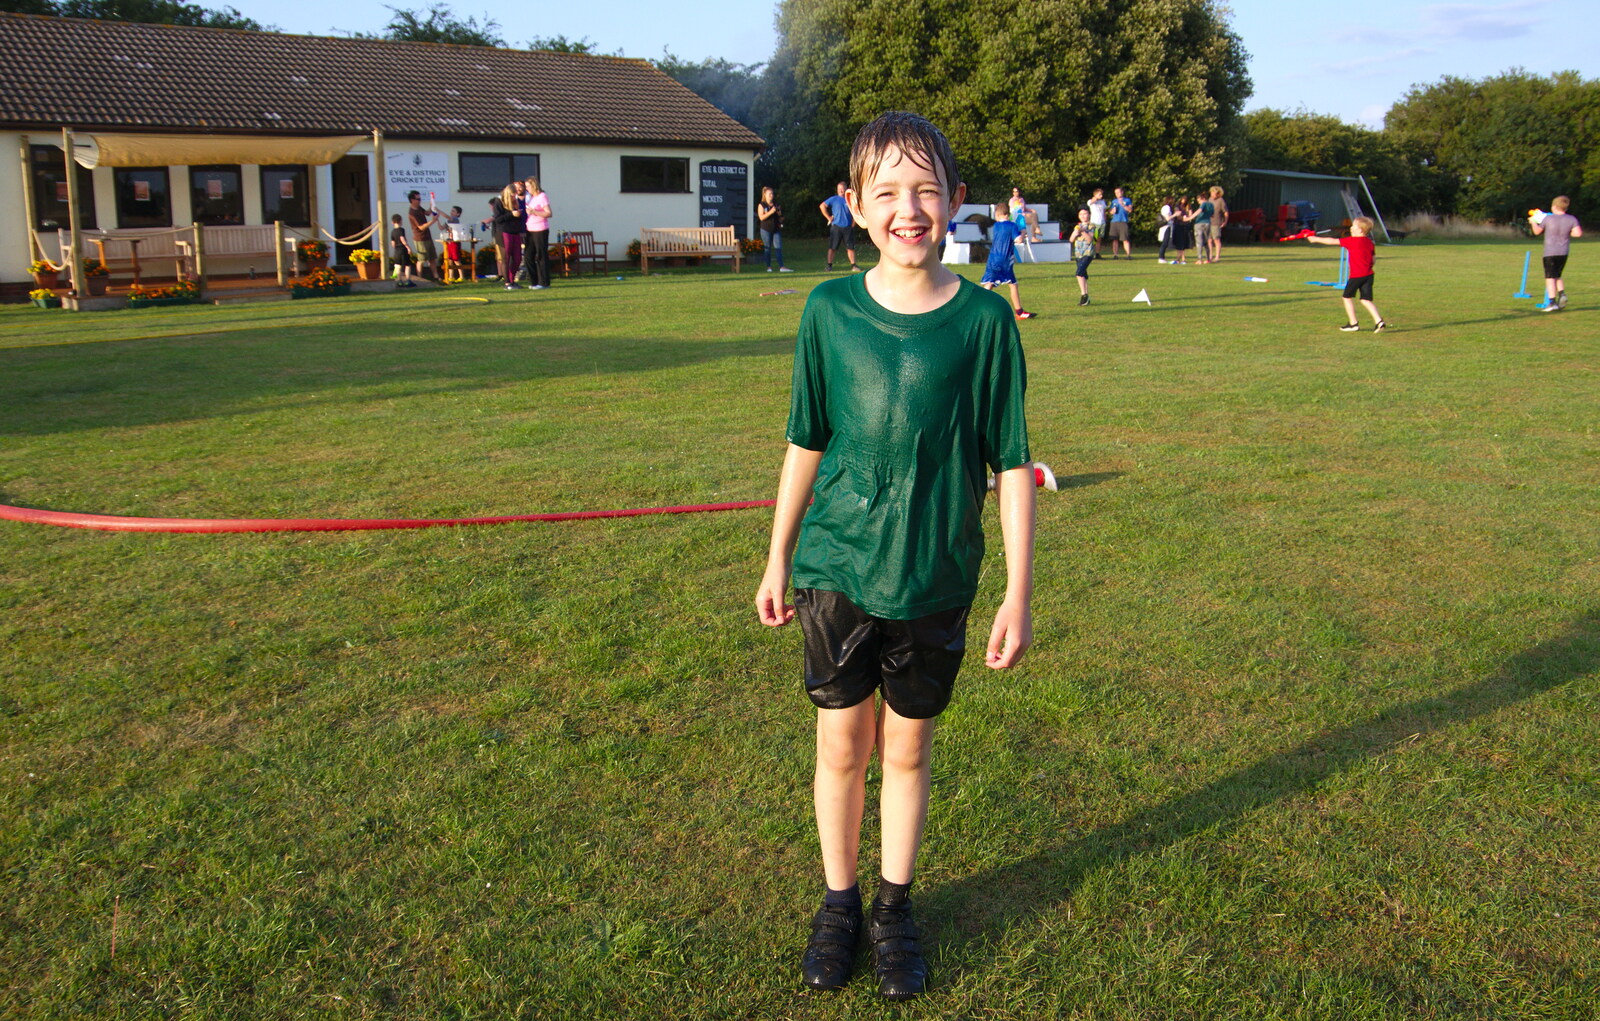 Fred's proud of his overall level of wetness from A Water Fight with a Fire Engine, Eye Cricket Club, Suffolk - 5th August 2019